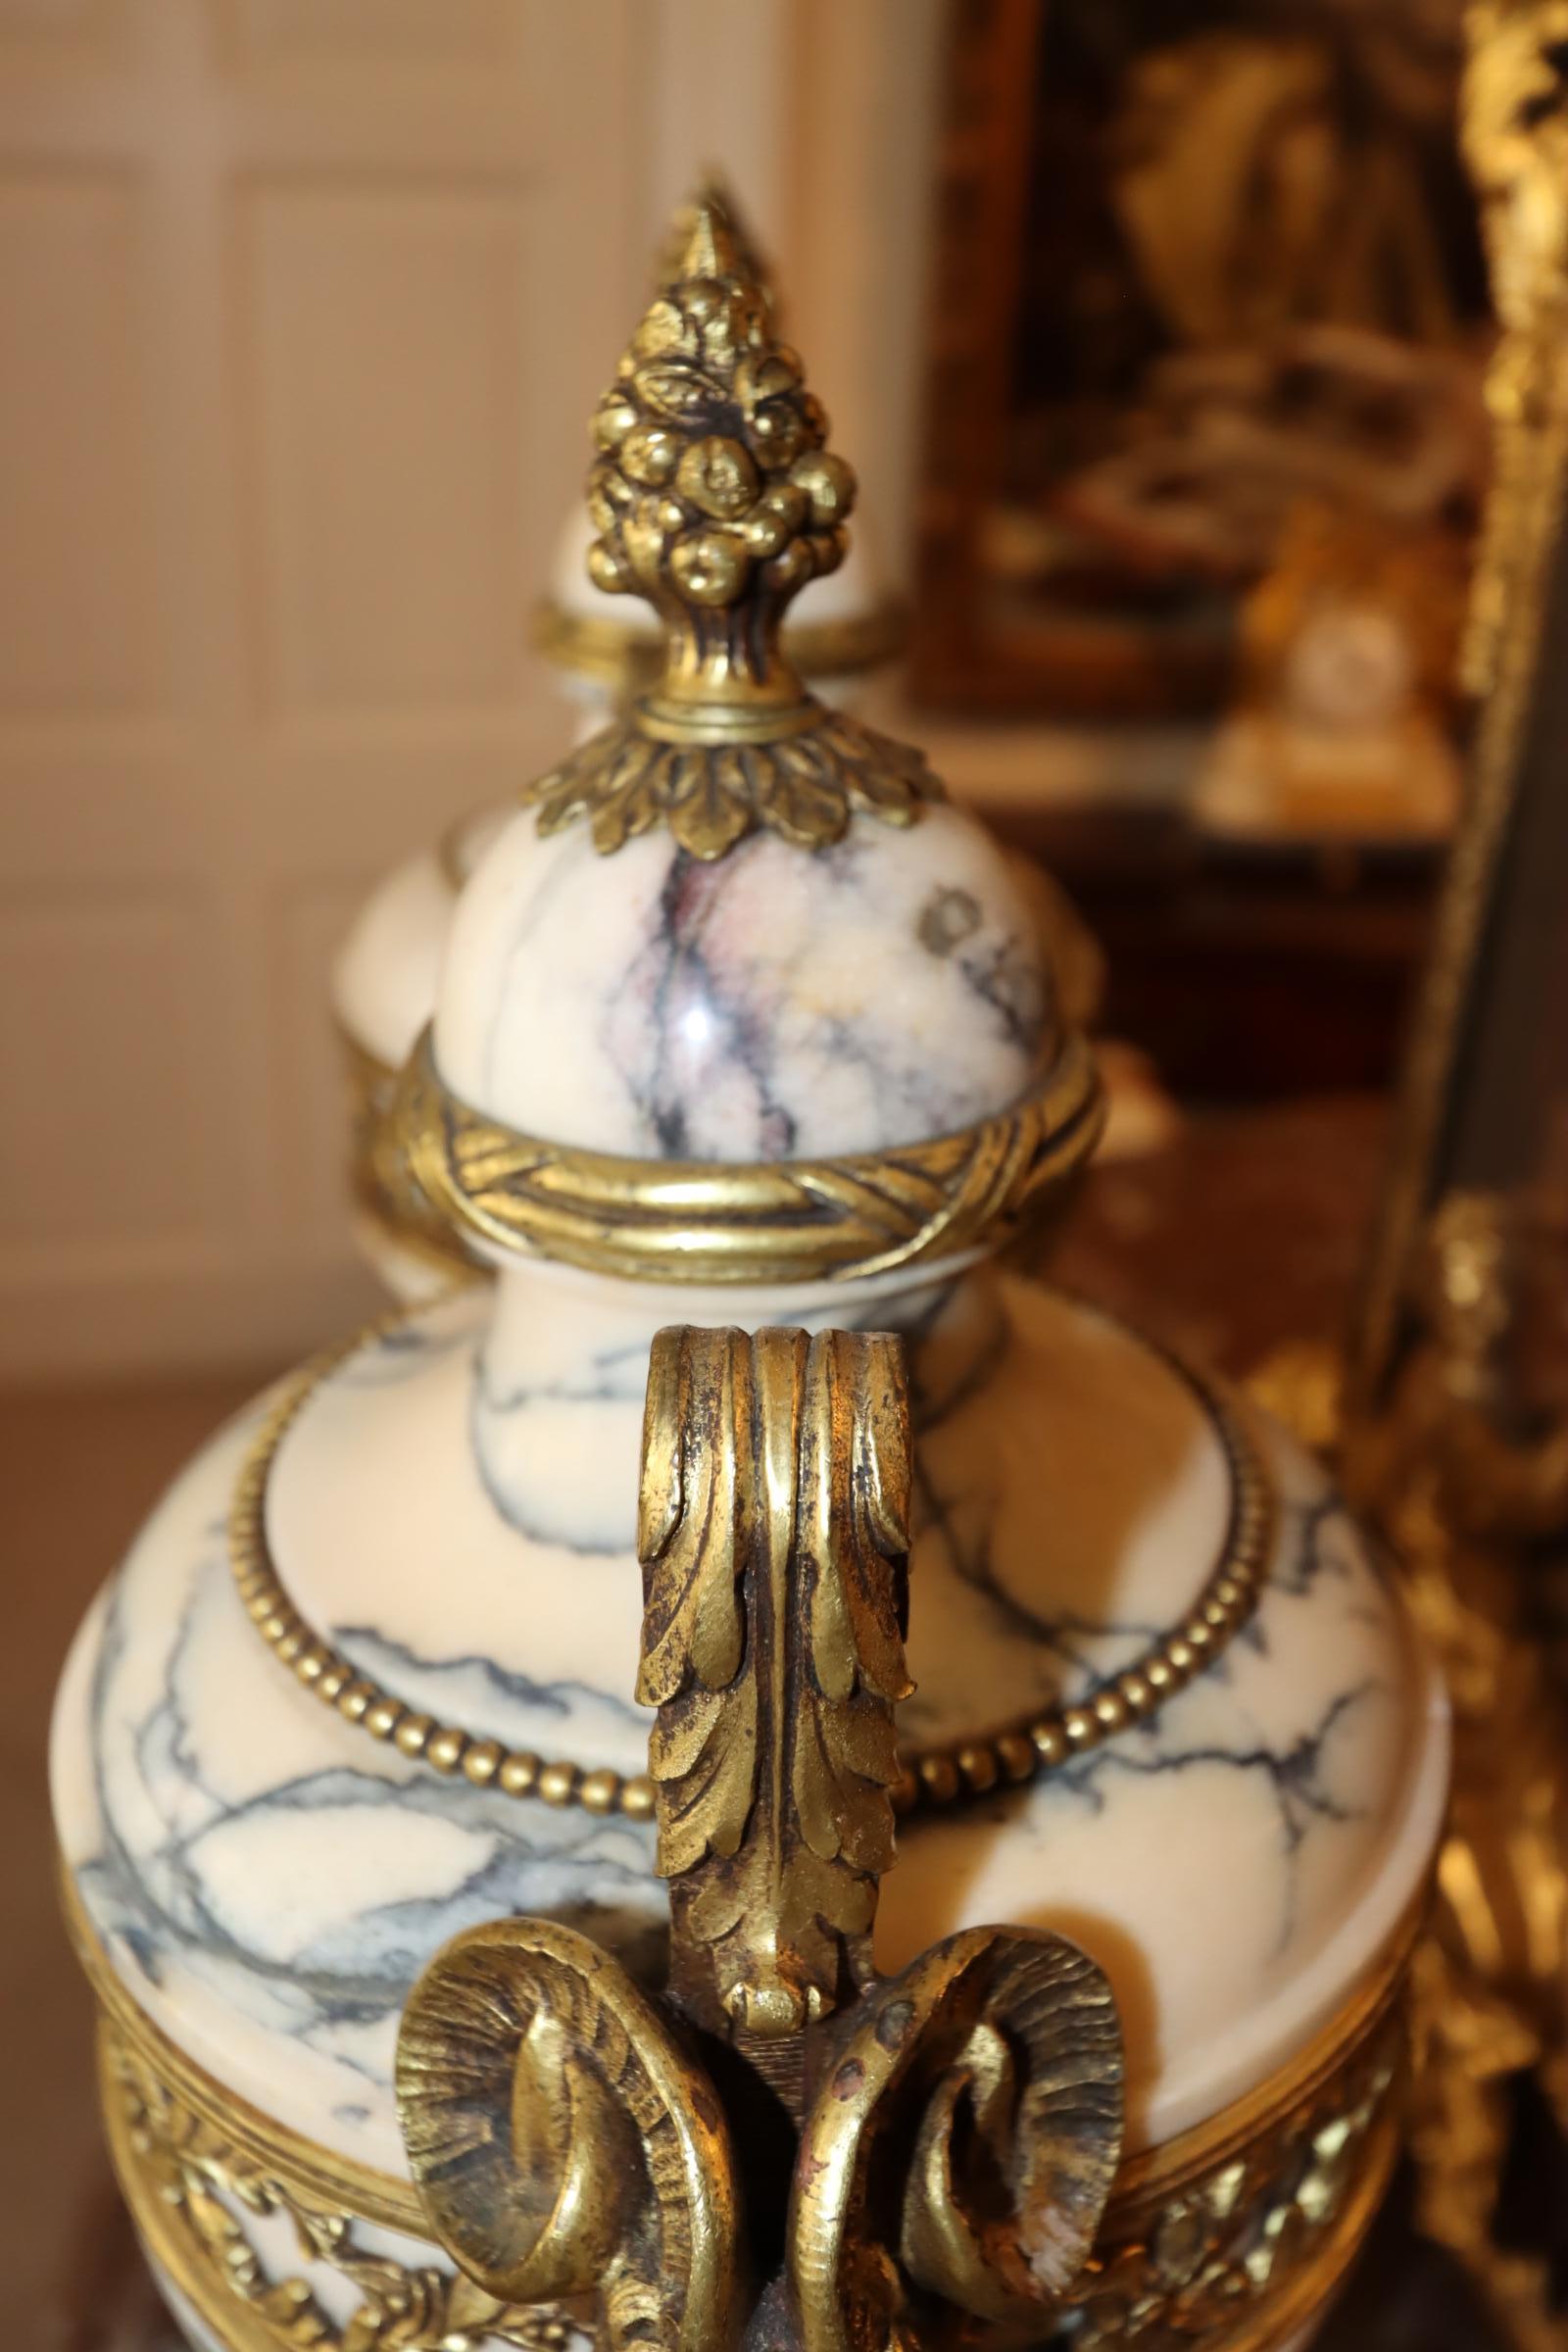 Marble Guilt Bronze Mounted Decorative Classical Urns, early to mid 19th Century For Sale 2